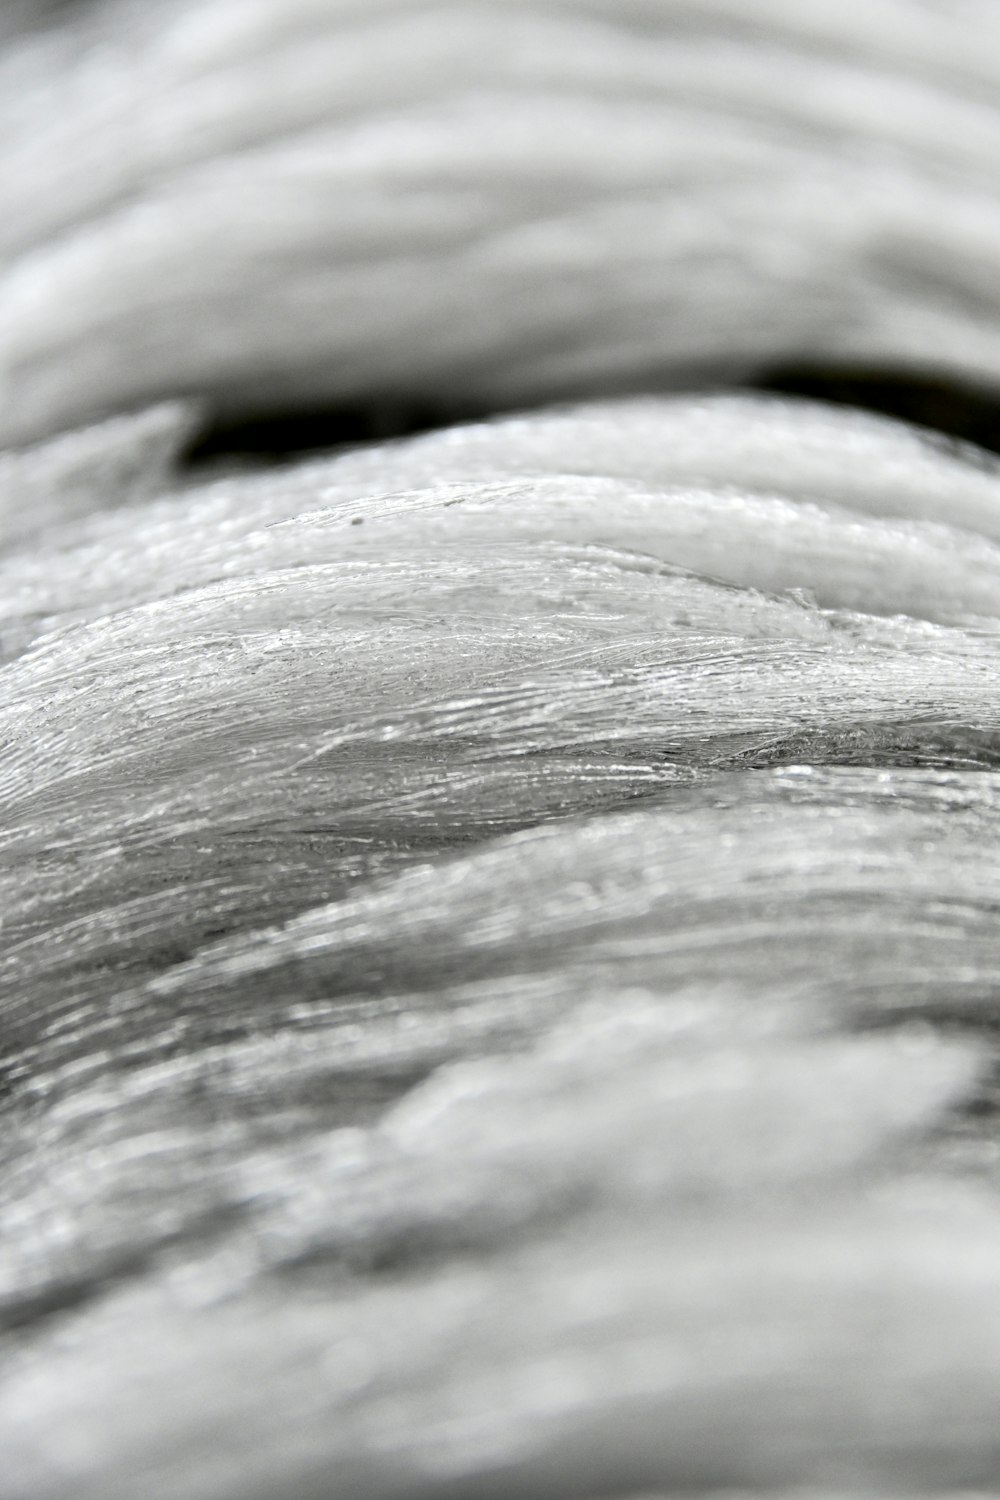 white and gray textile in close up photography